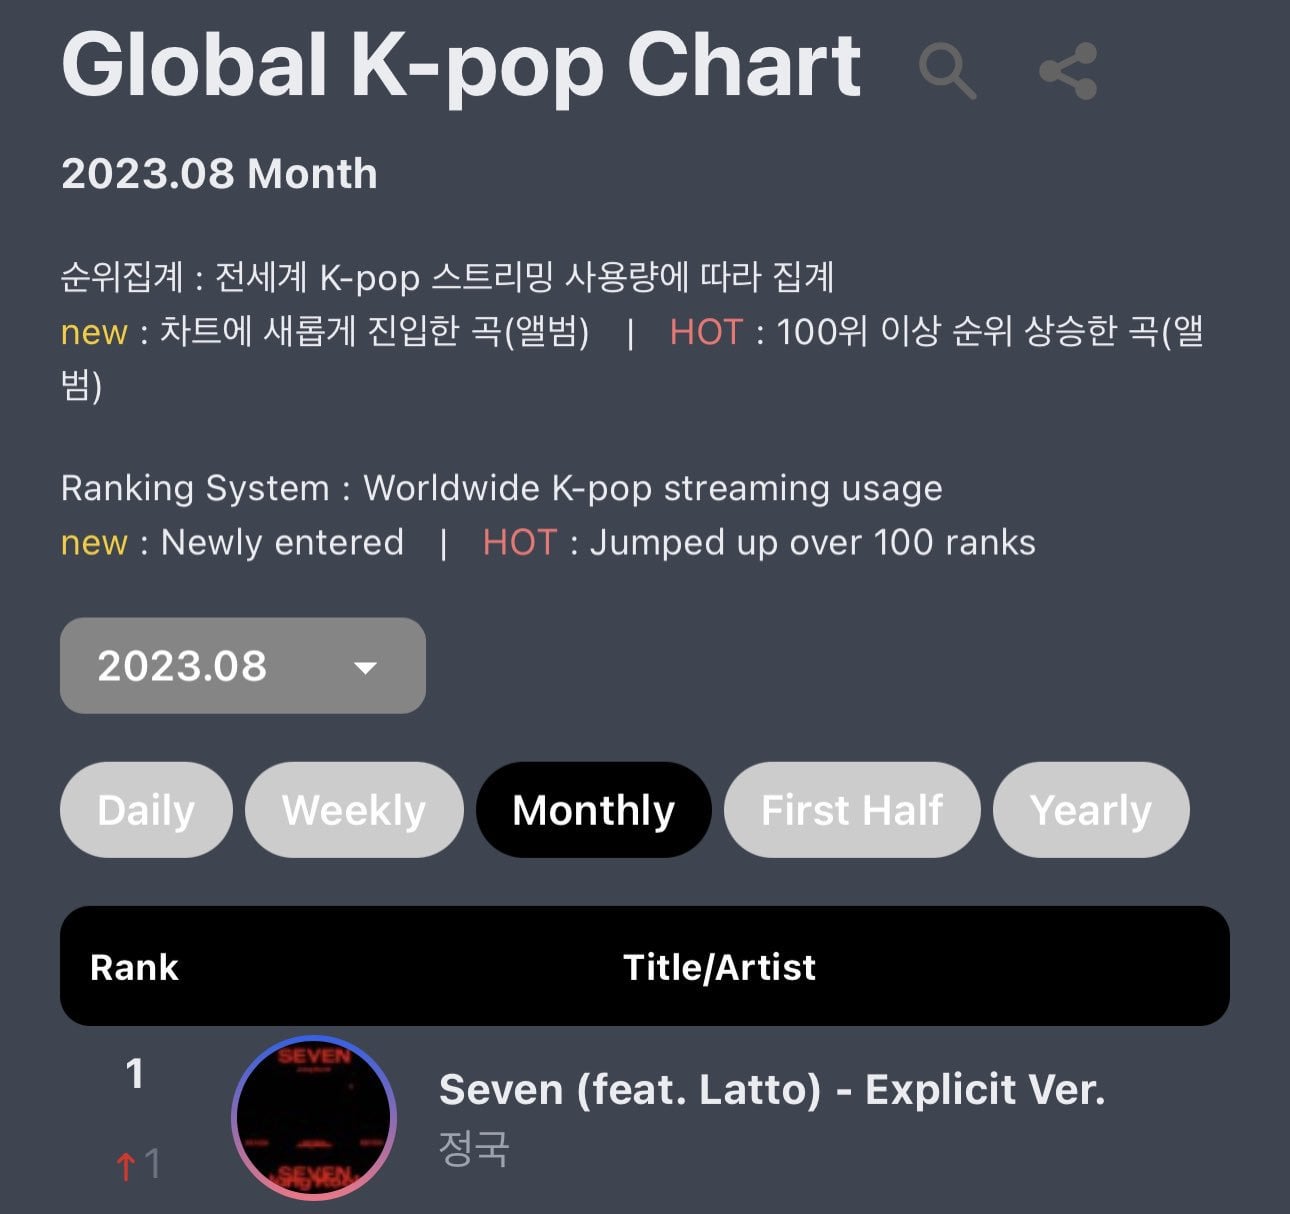 230907 “Seven (feat. Latto) - Explicit Ver." reaches a new peak of #1 (+1) on Circle Global K-Pop Monthly Chart and remains at #1 on the weekly chart!